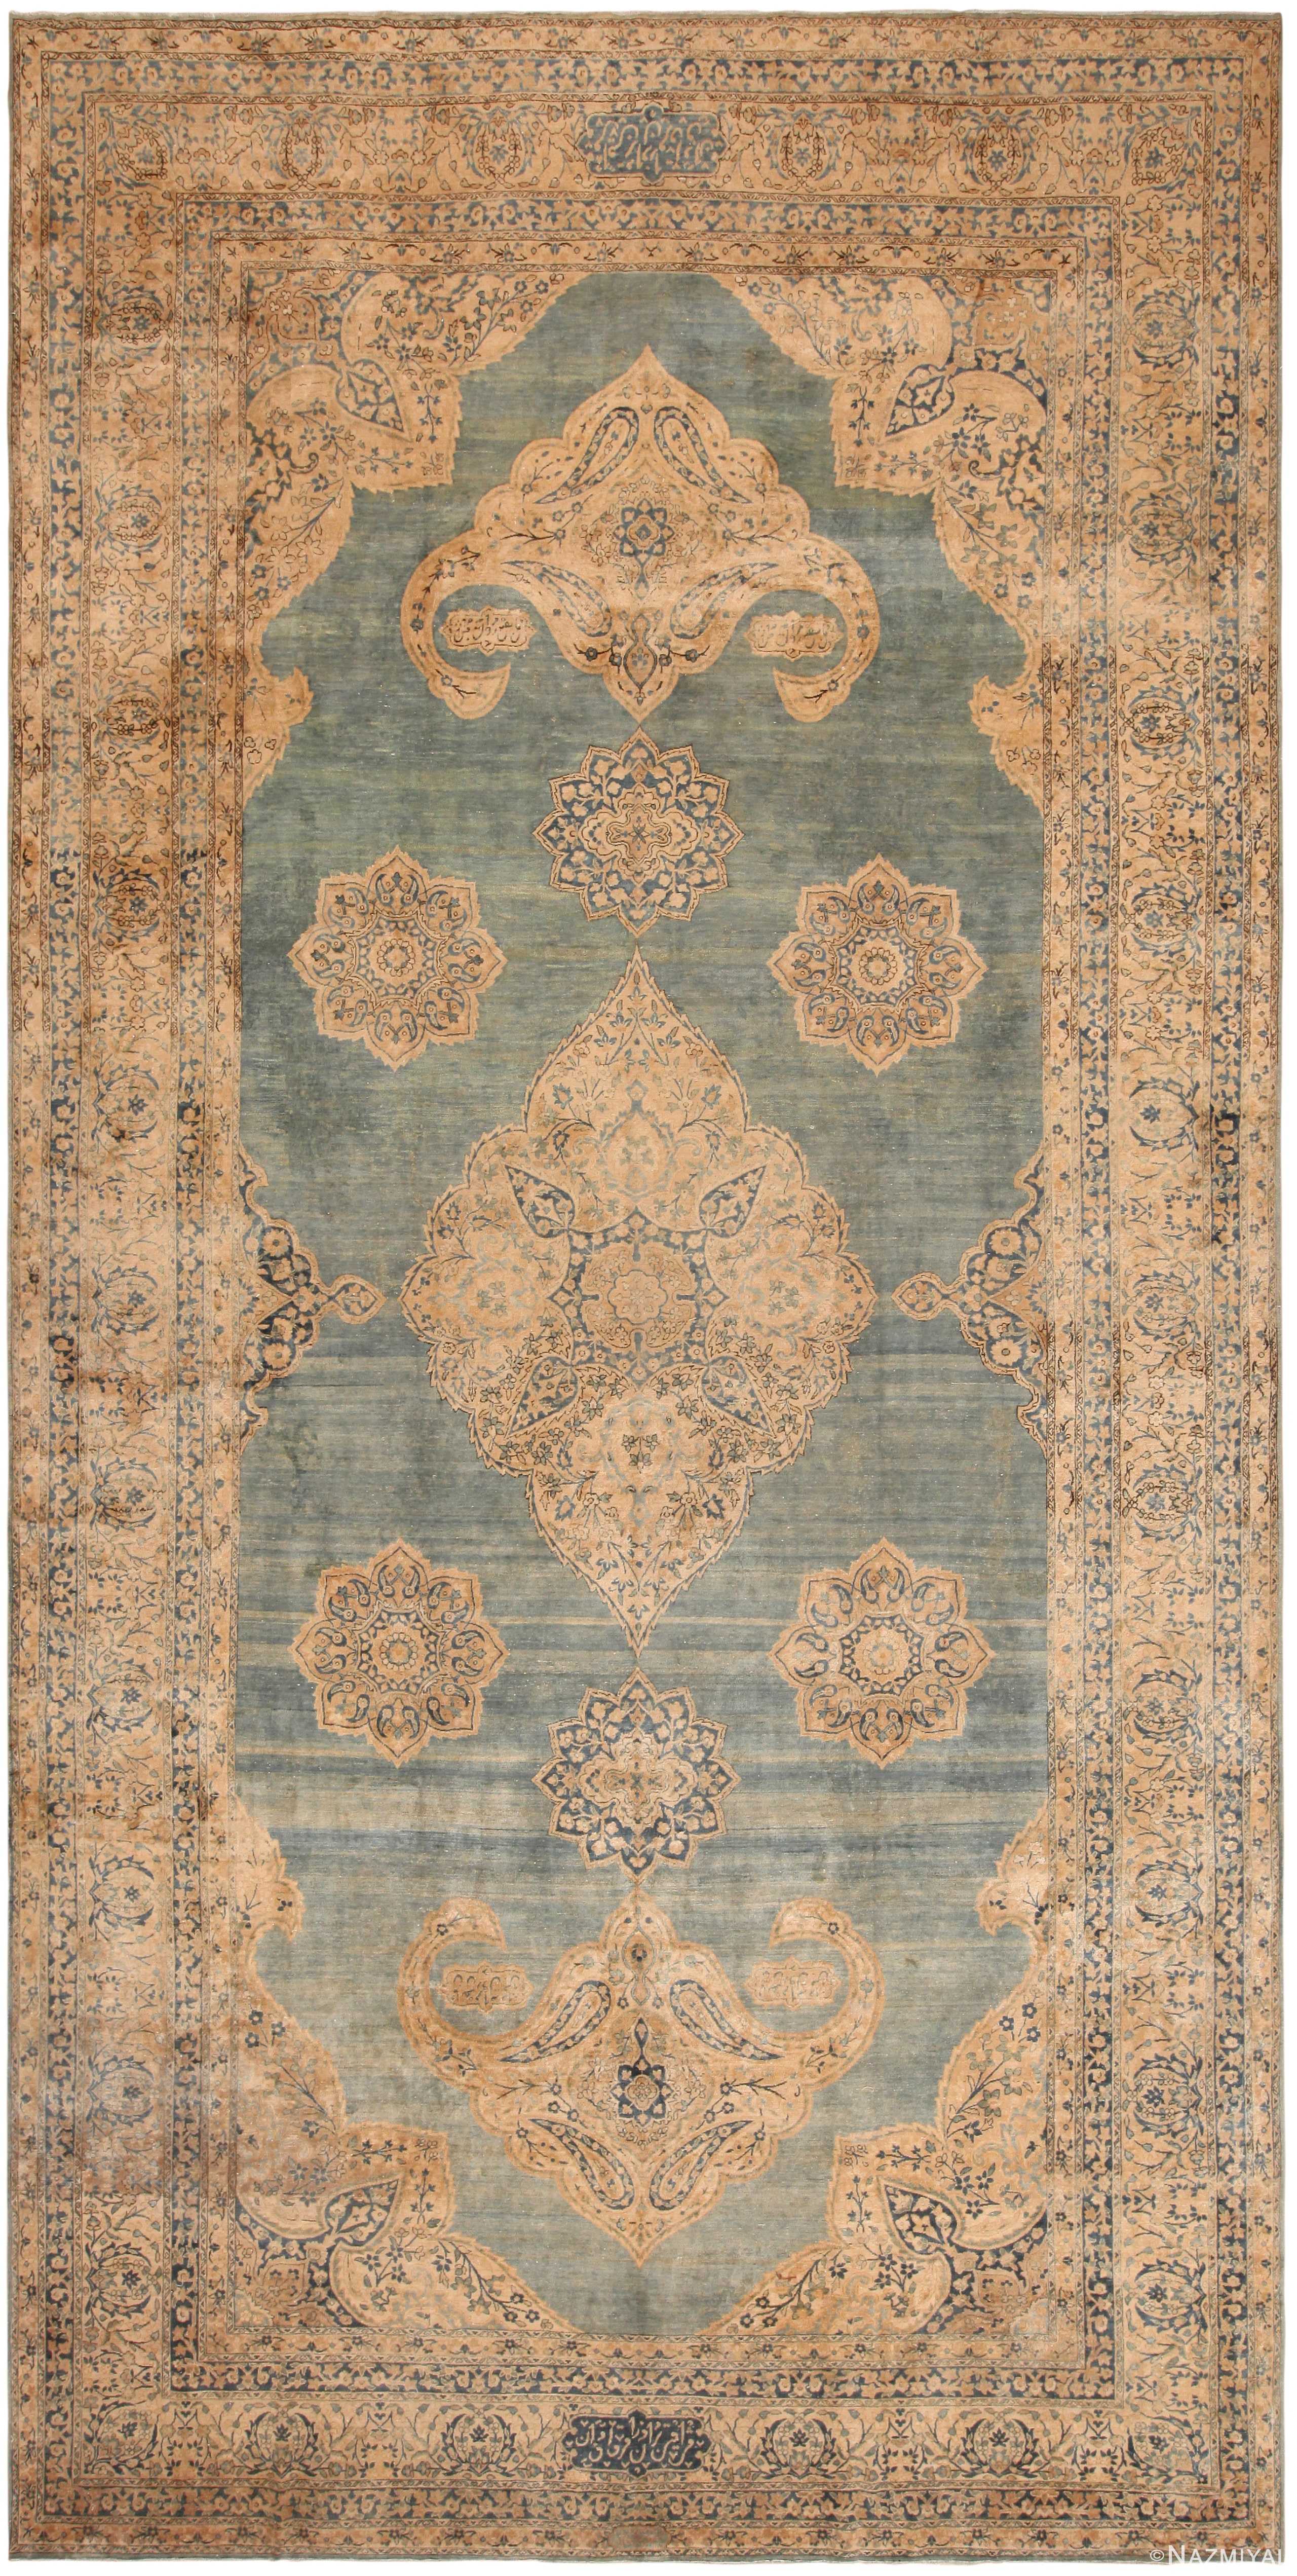 Gallery Size Blue Background Antique Persian Kerman Rug 71336 by Nazmiyal Antique Rugs